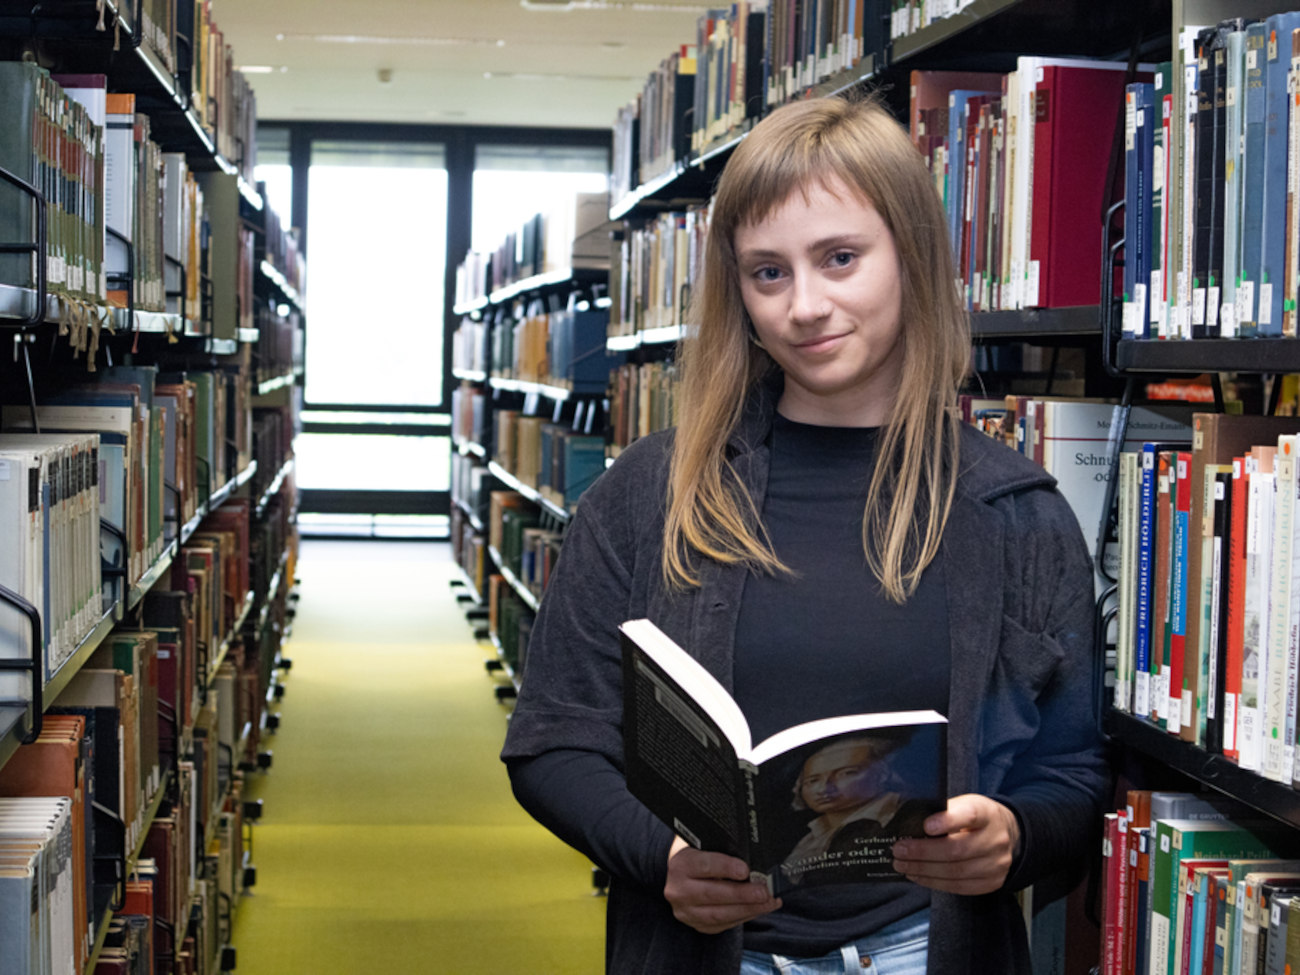 Jenny is holding a book in her hands while standing in the library.